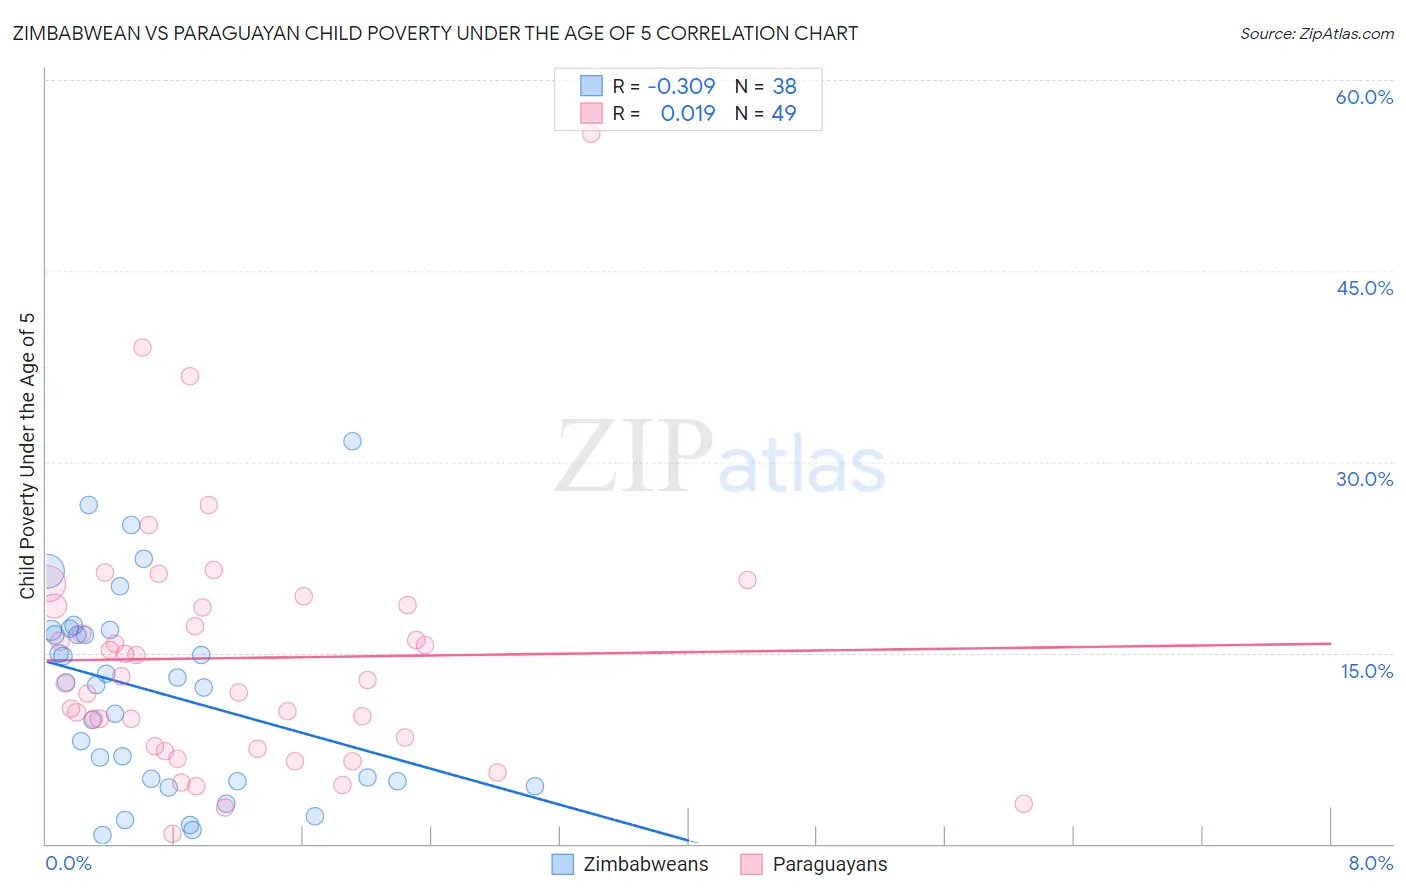 Zimbabwean vs Paraguayan Child Poverty Under the Age of 5